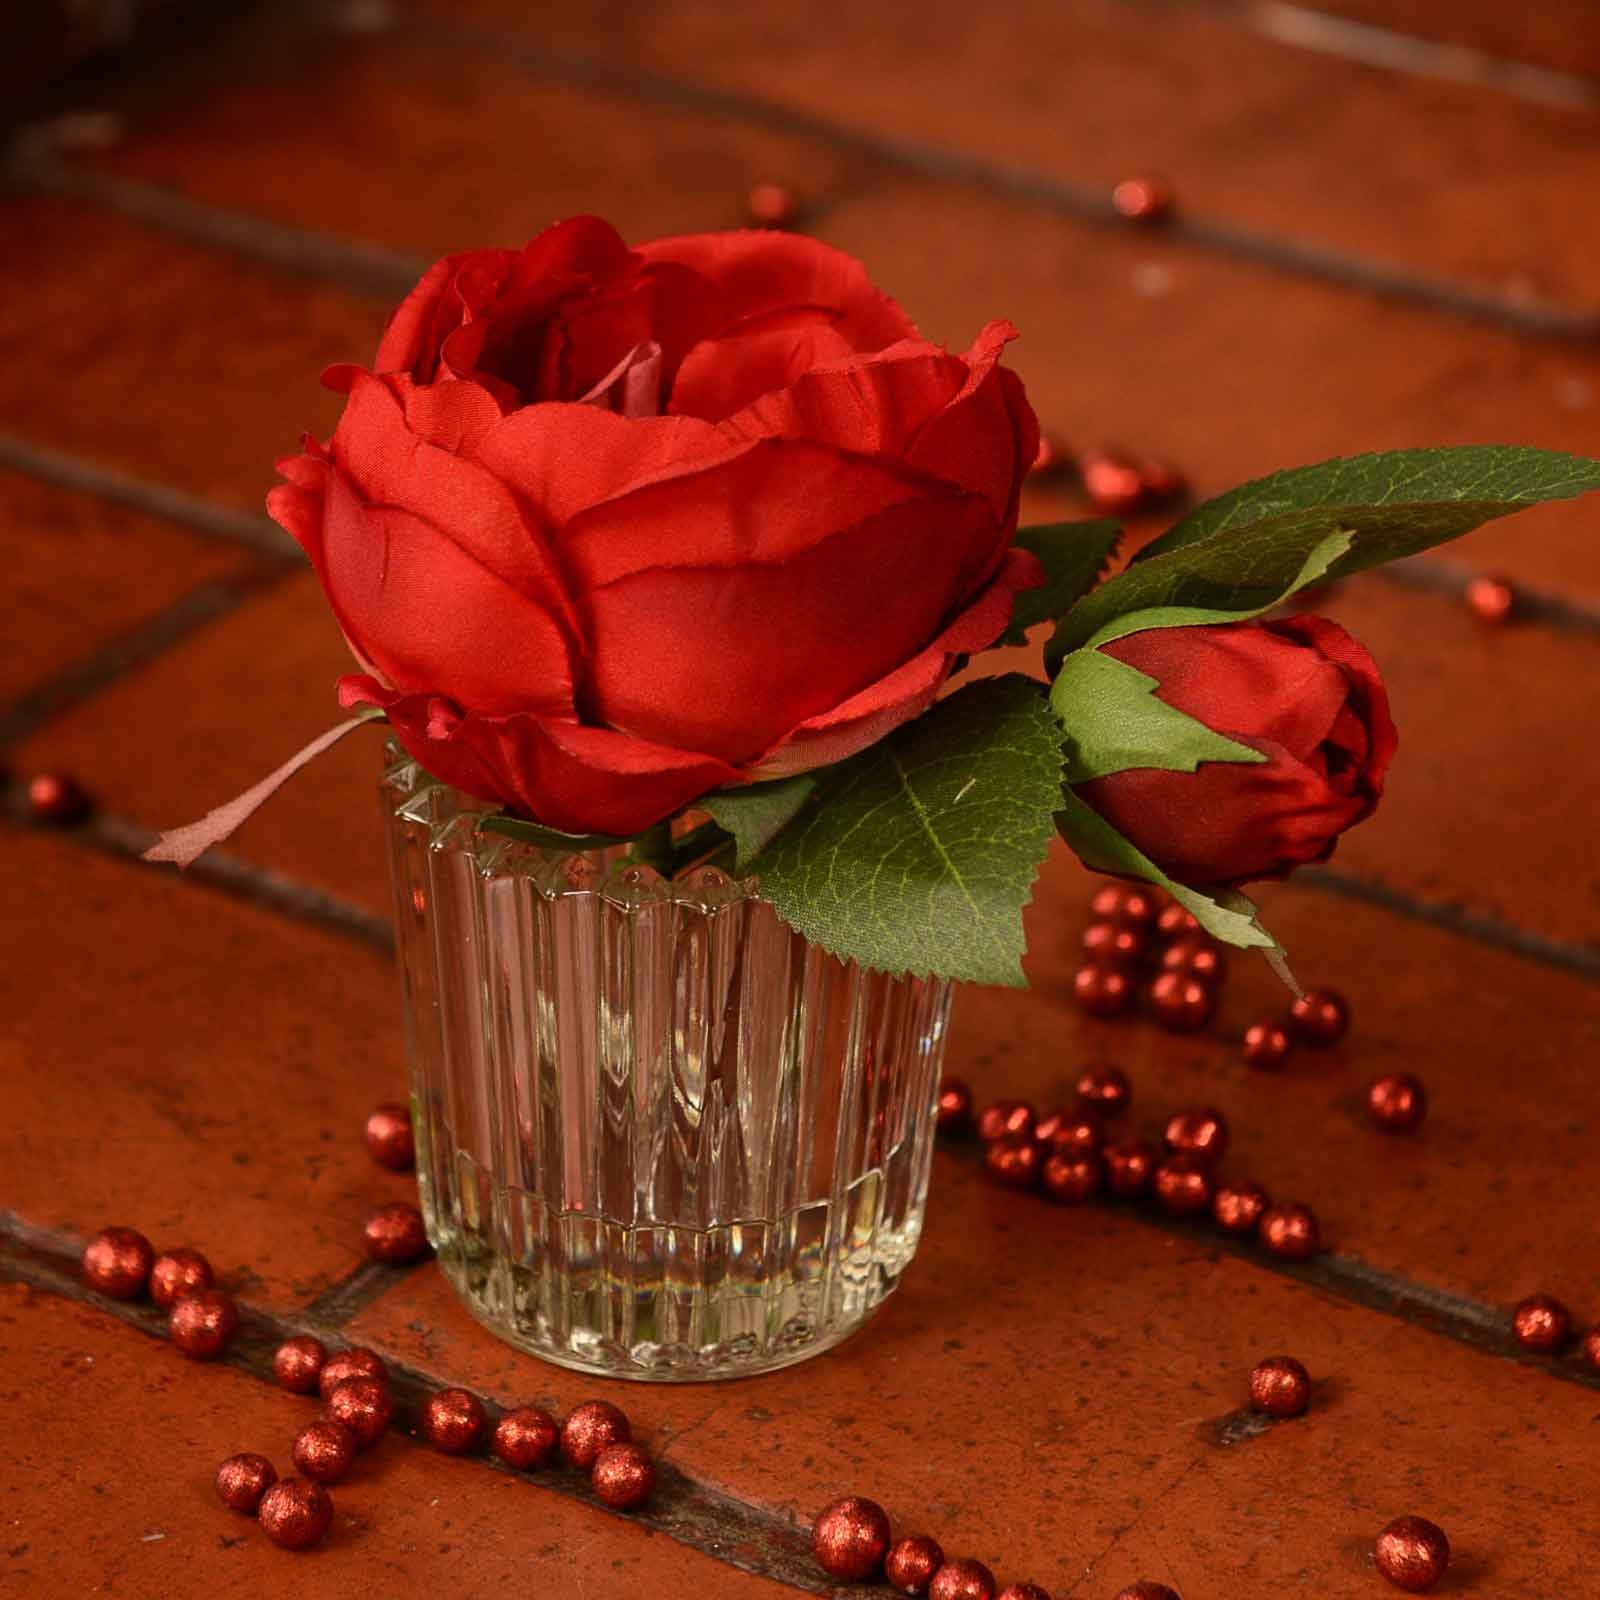 Red Rose Stem in Small Vase by Sia - Harrod Horticultural